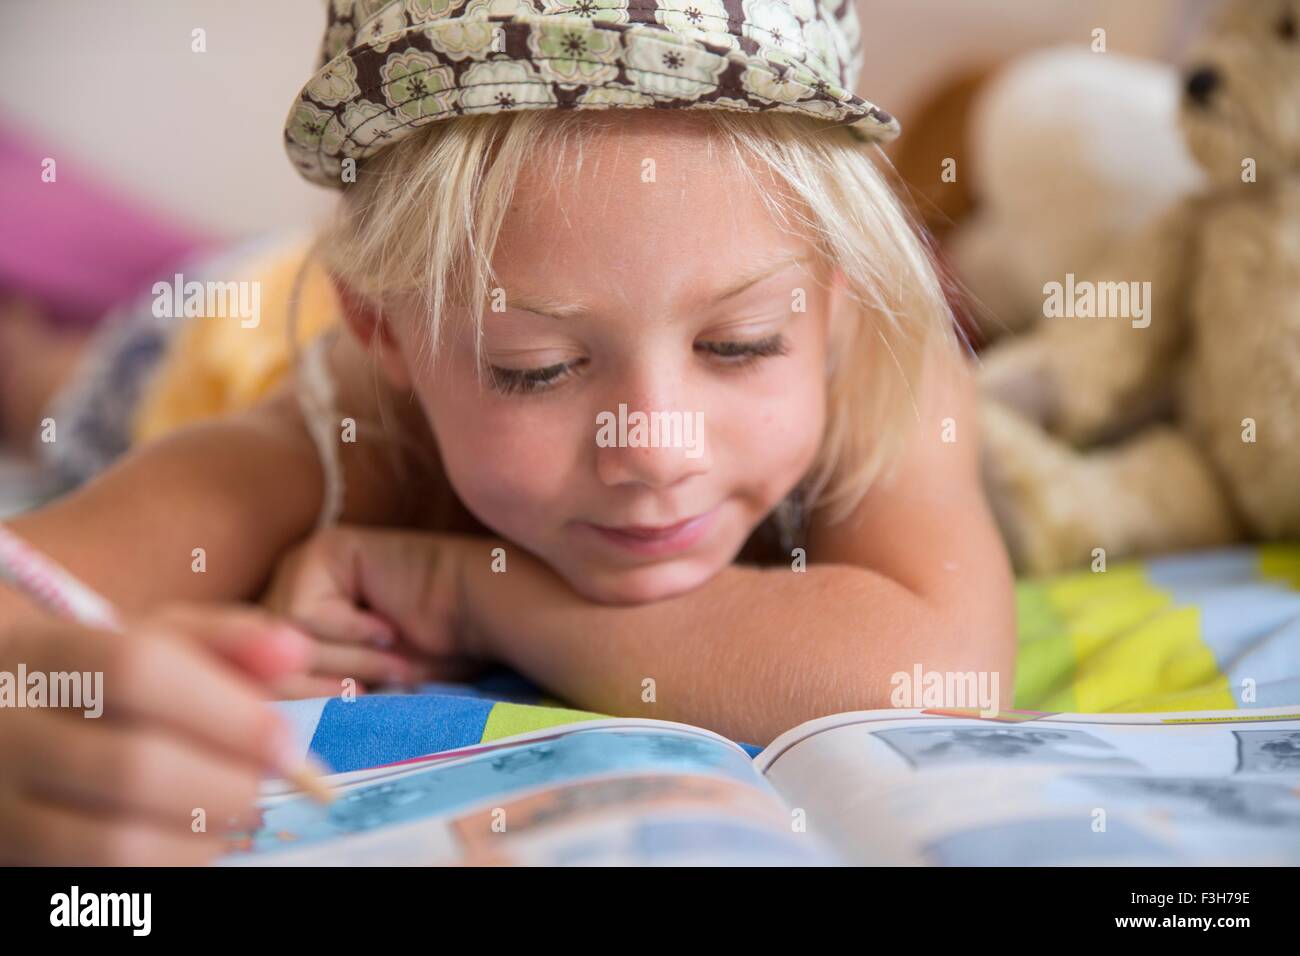 Girl lying on bed looking at questions dans livre-puzzle Banque D'Images